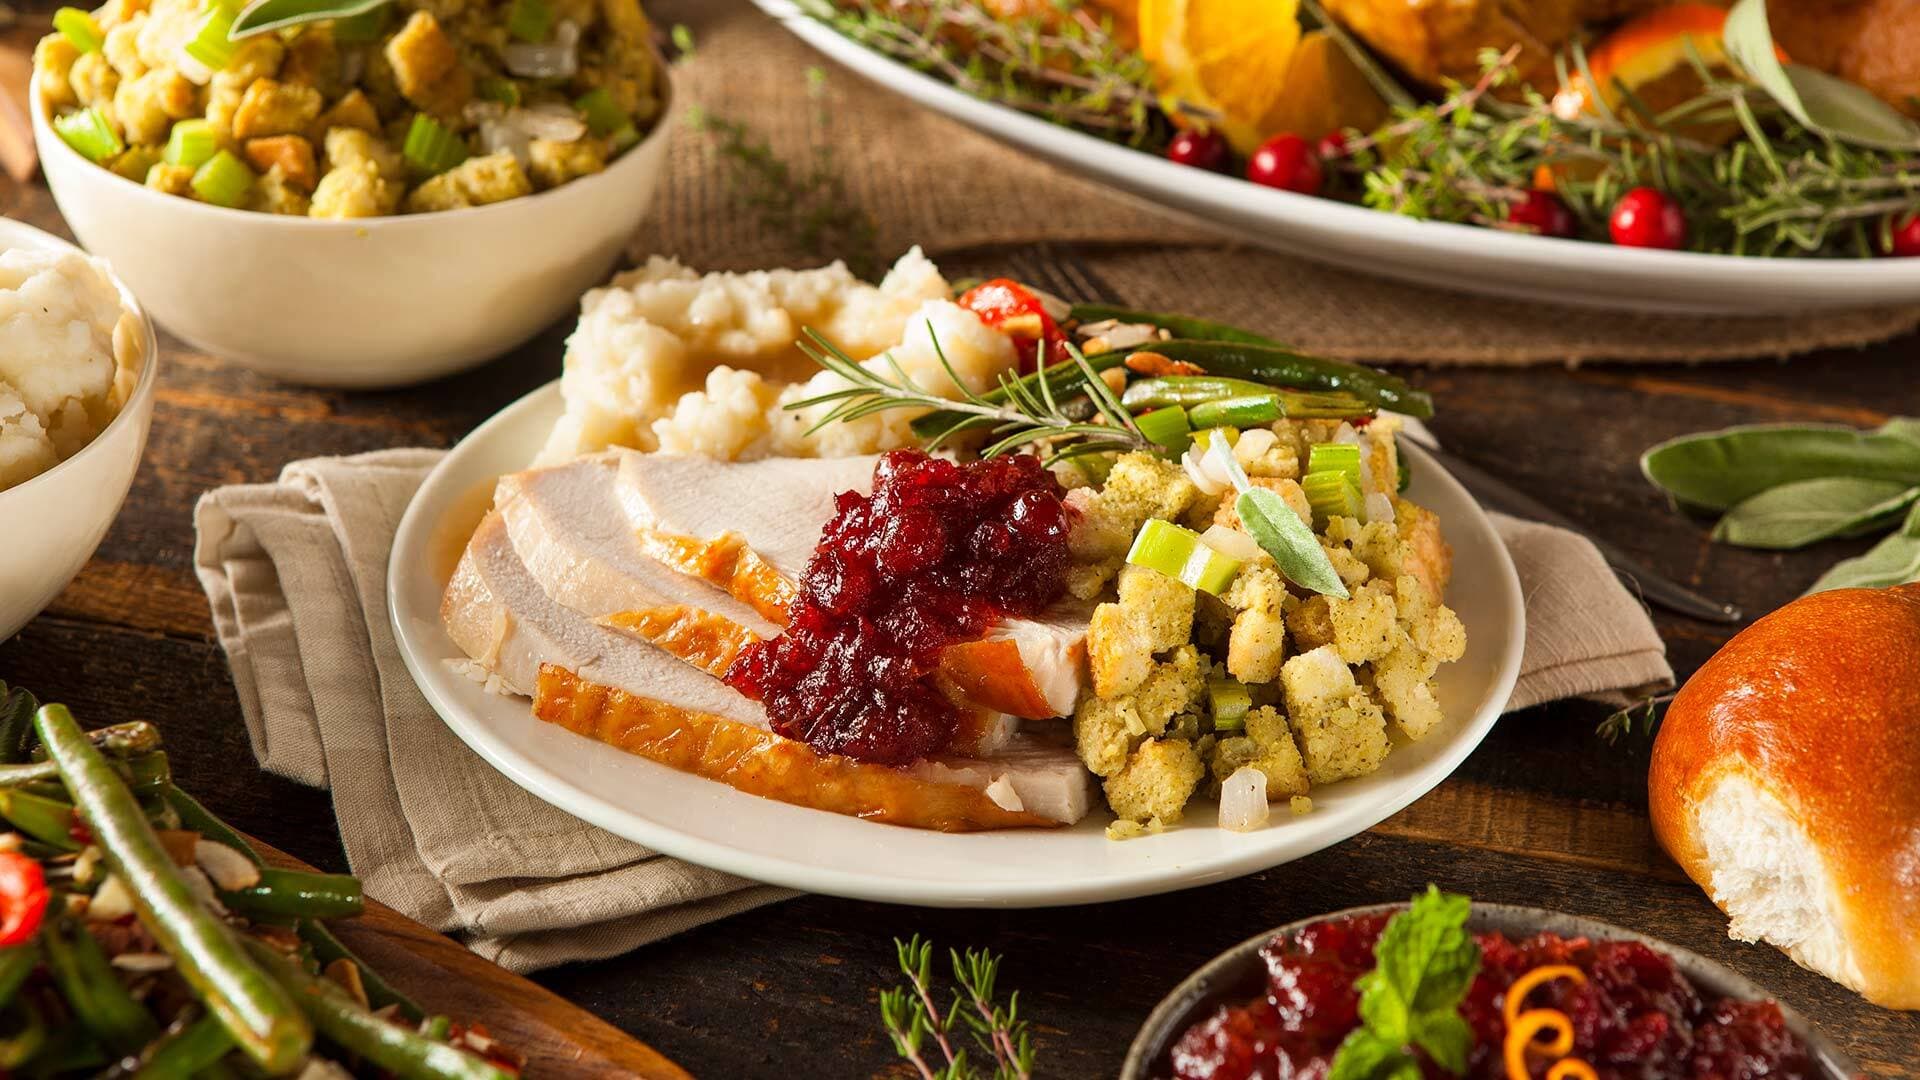 Plate of Thanksgiving food